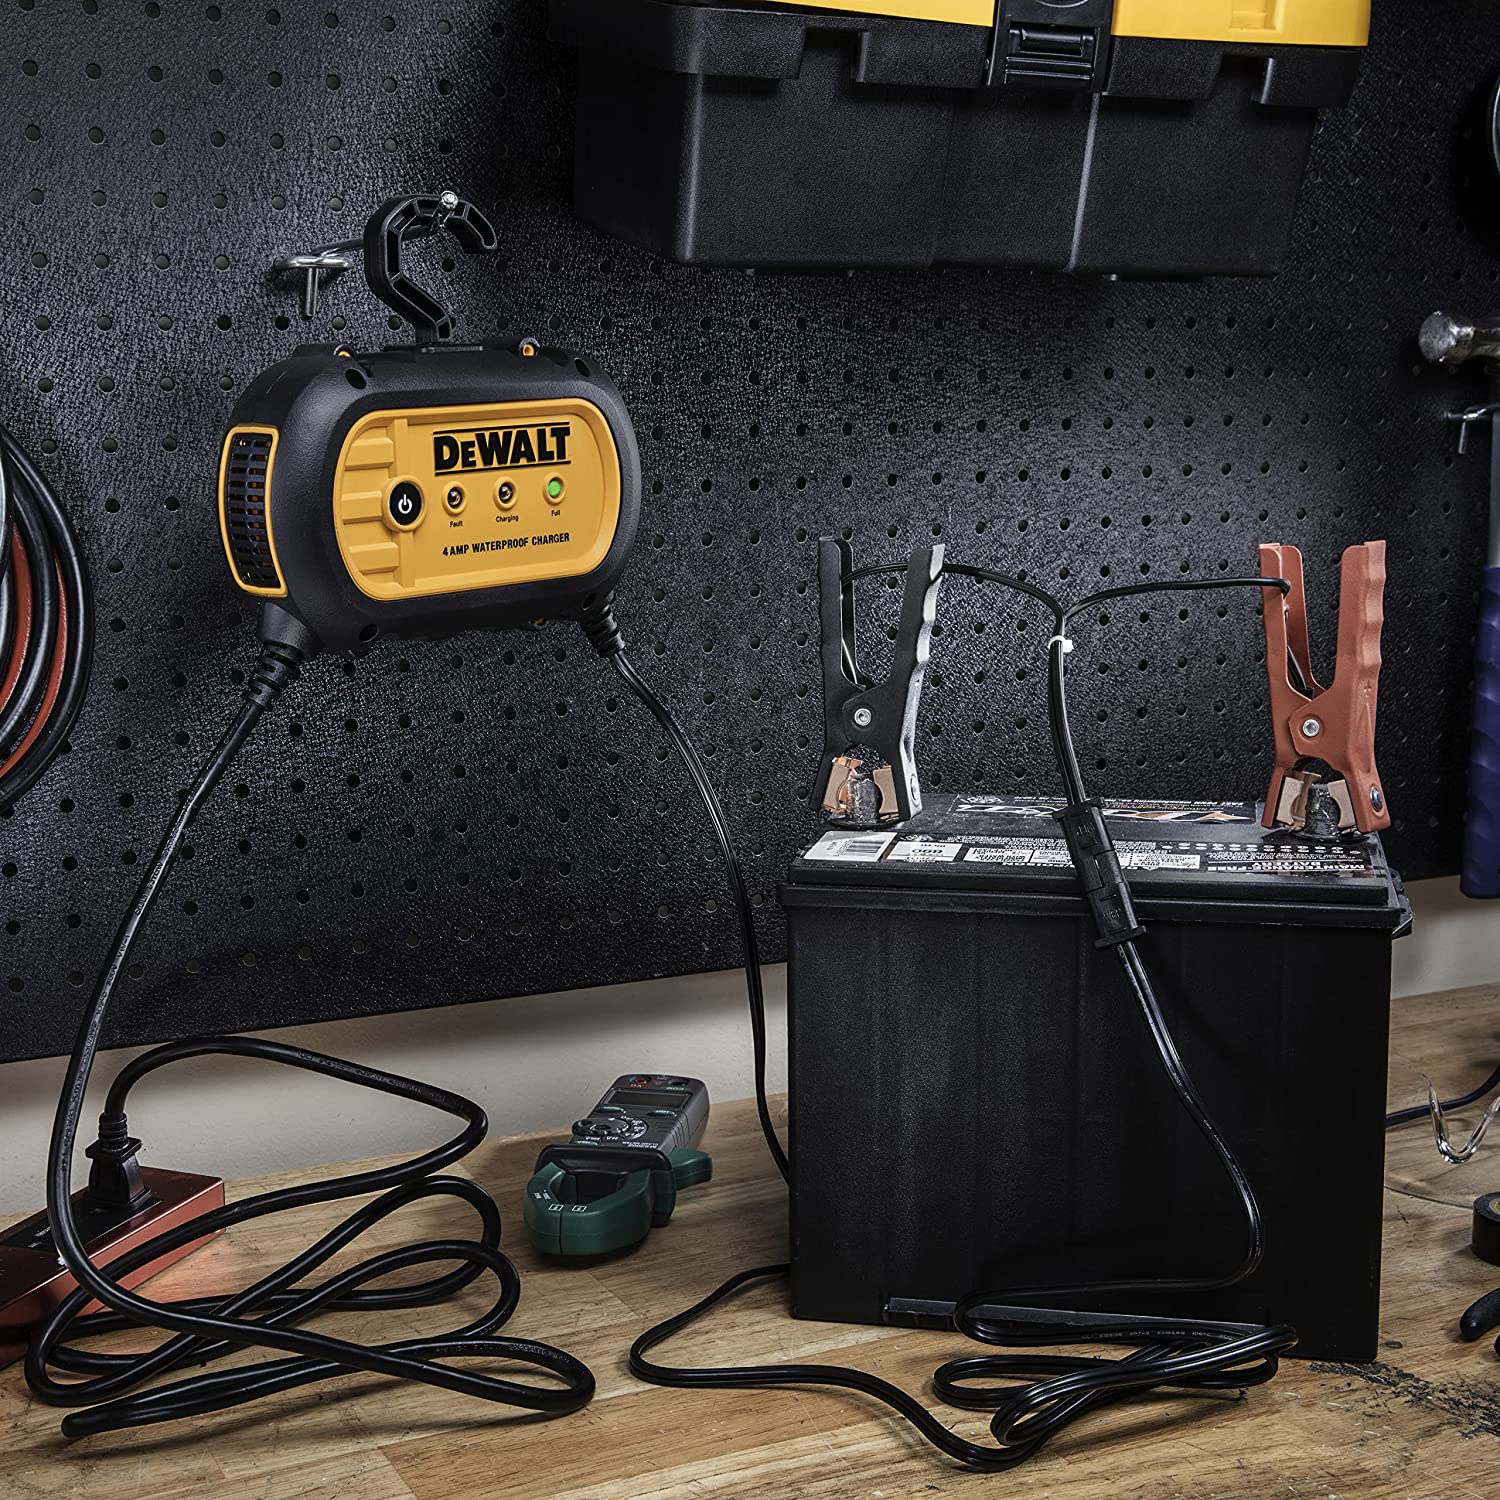 Dewalt battery charger, Waterproof Battery Charger | Professional Charger Showroom- E.S.N Tools